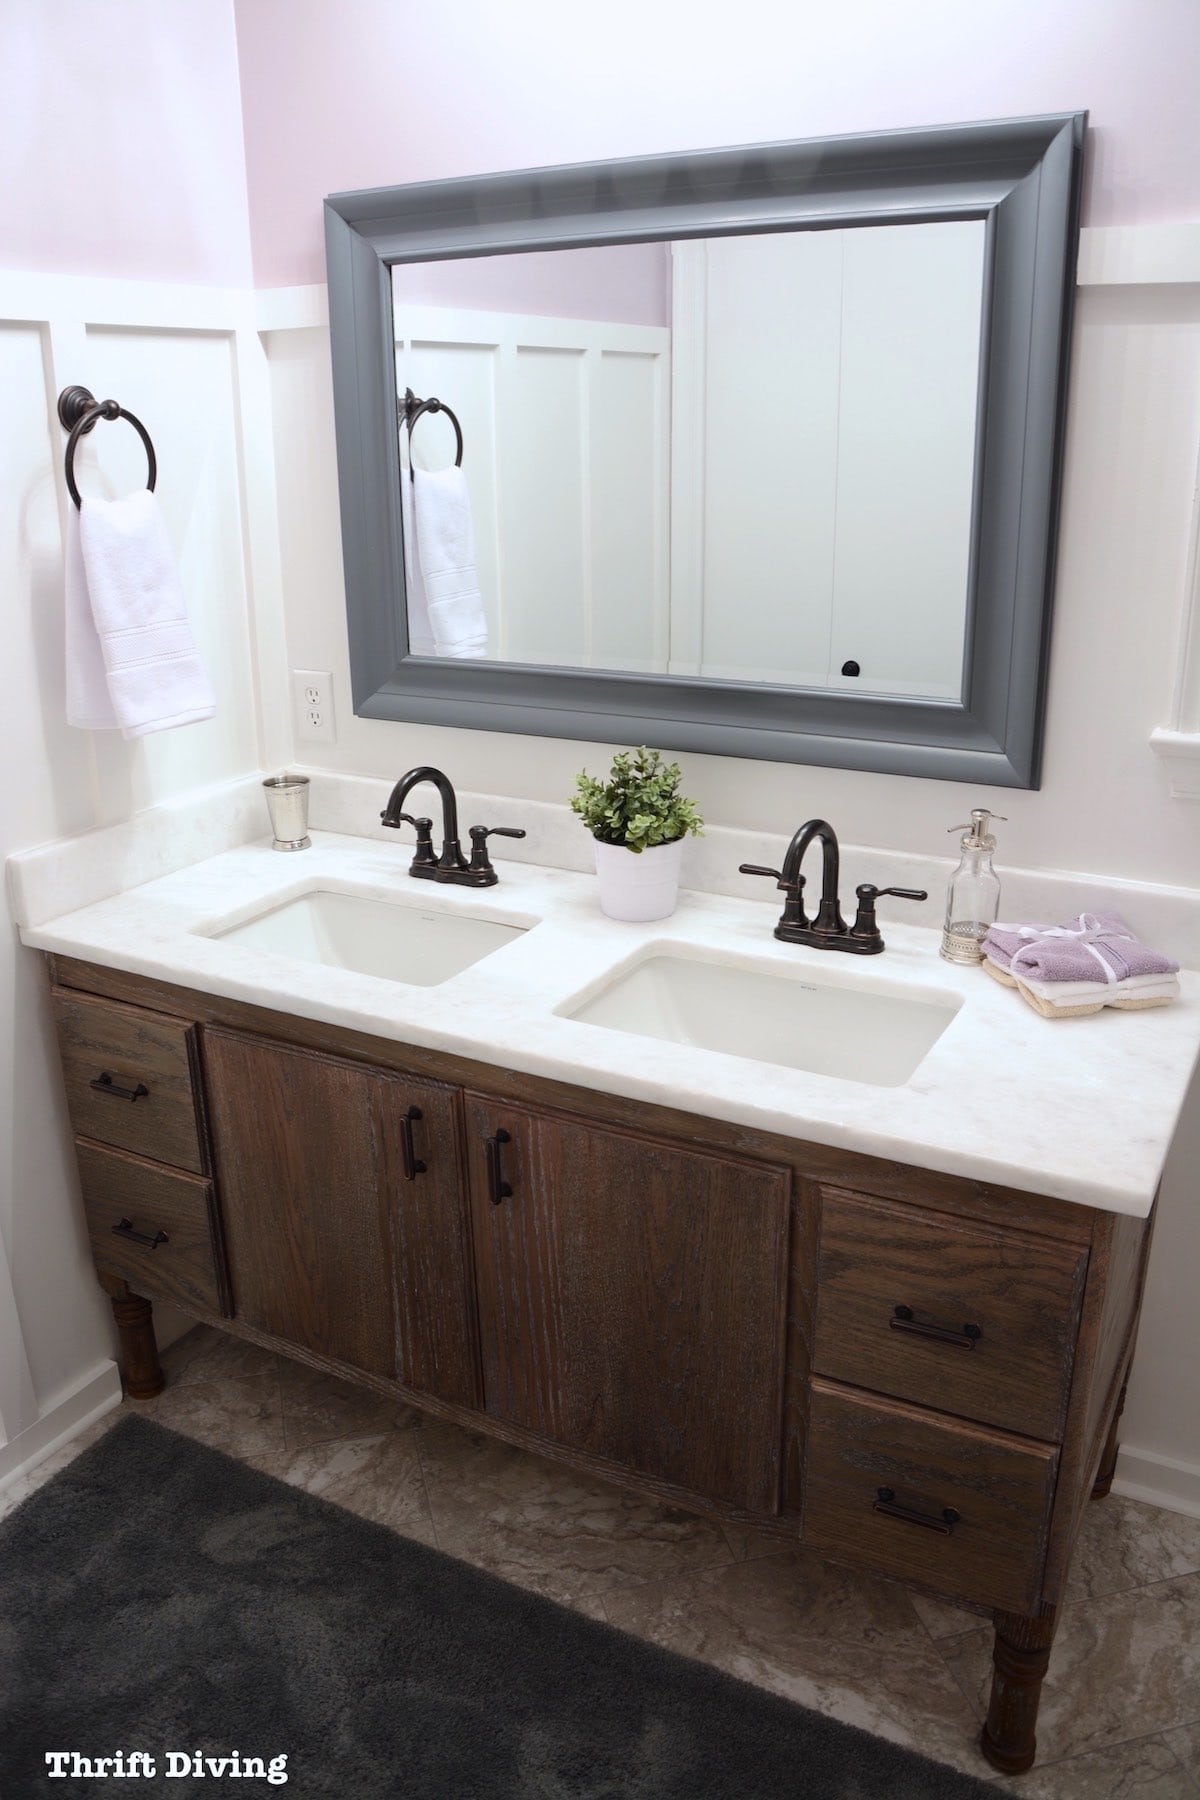 How to Finish Your DIY Projects - Bathroom vanity - Thrift Diving